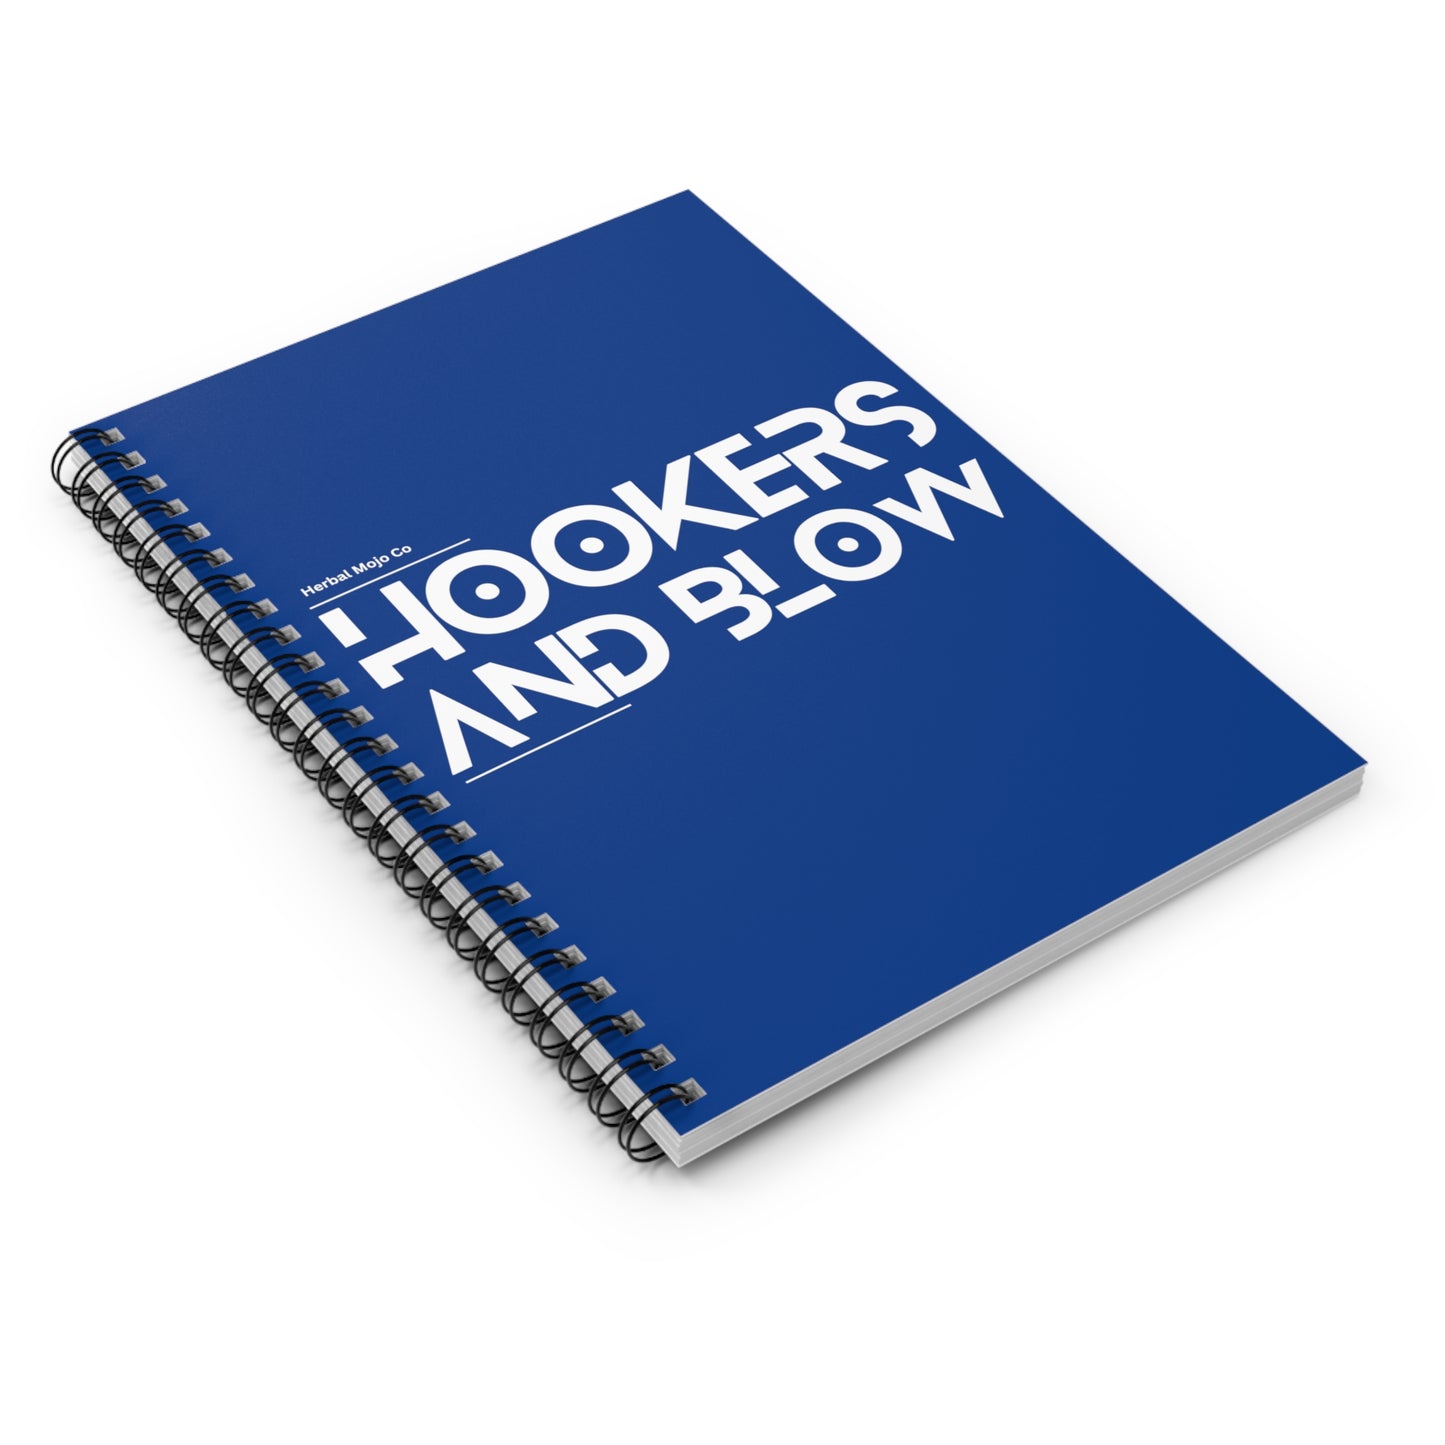 Stamina for Men Hookers & Blow notebook alternative product shot with white background